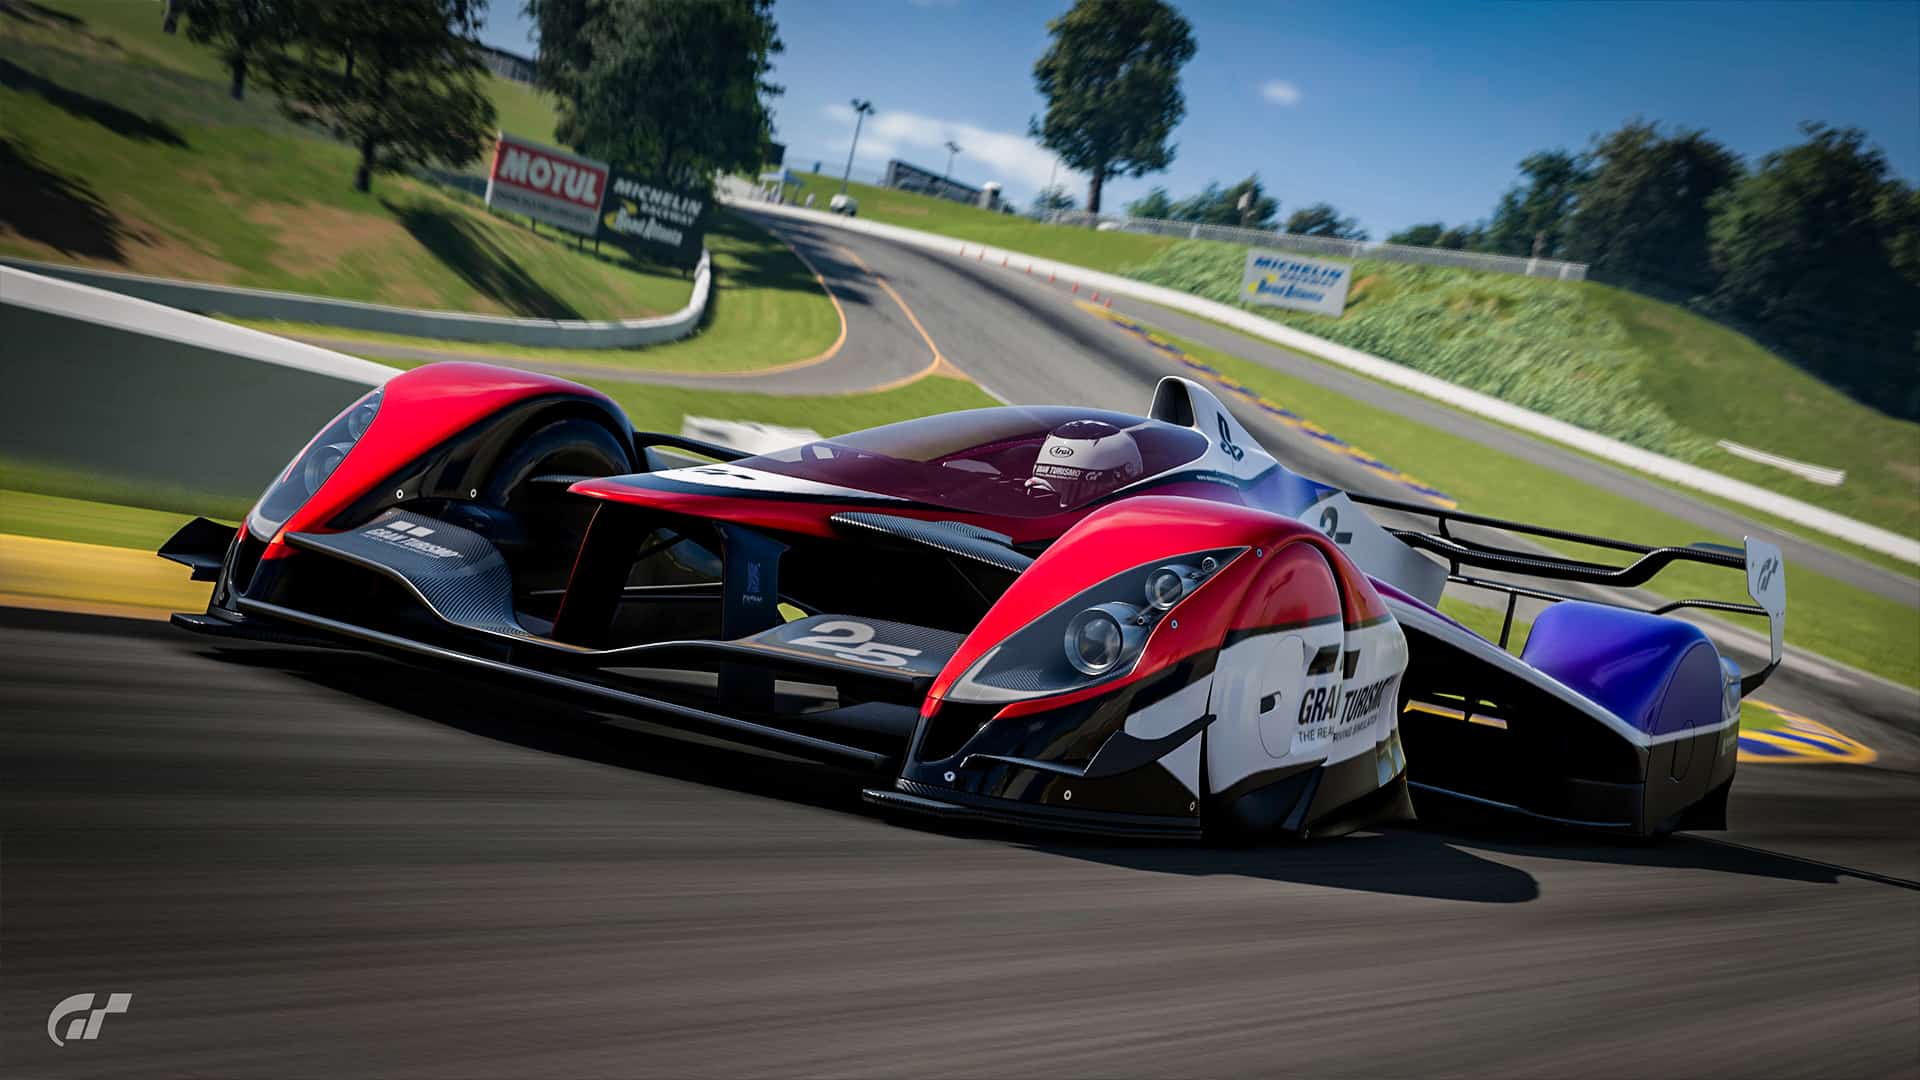 Gran Turismo 7 Review: The racing game that took 25 years to